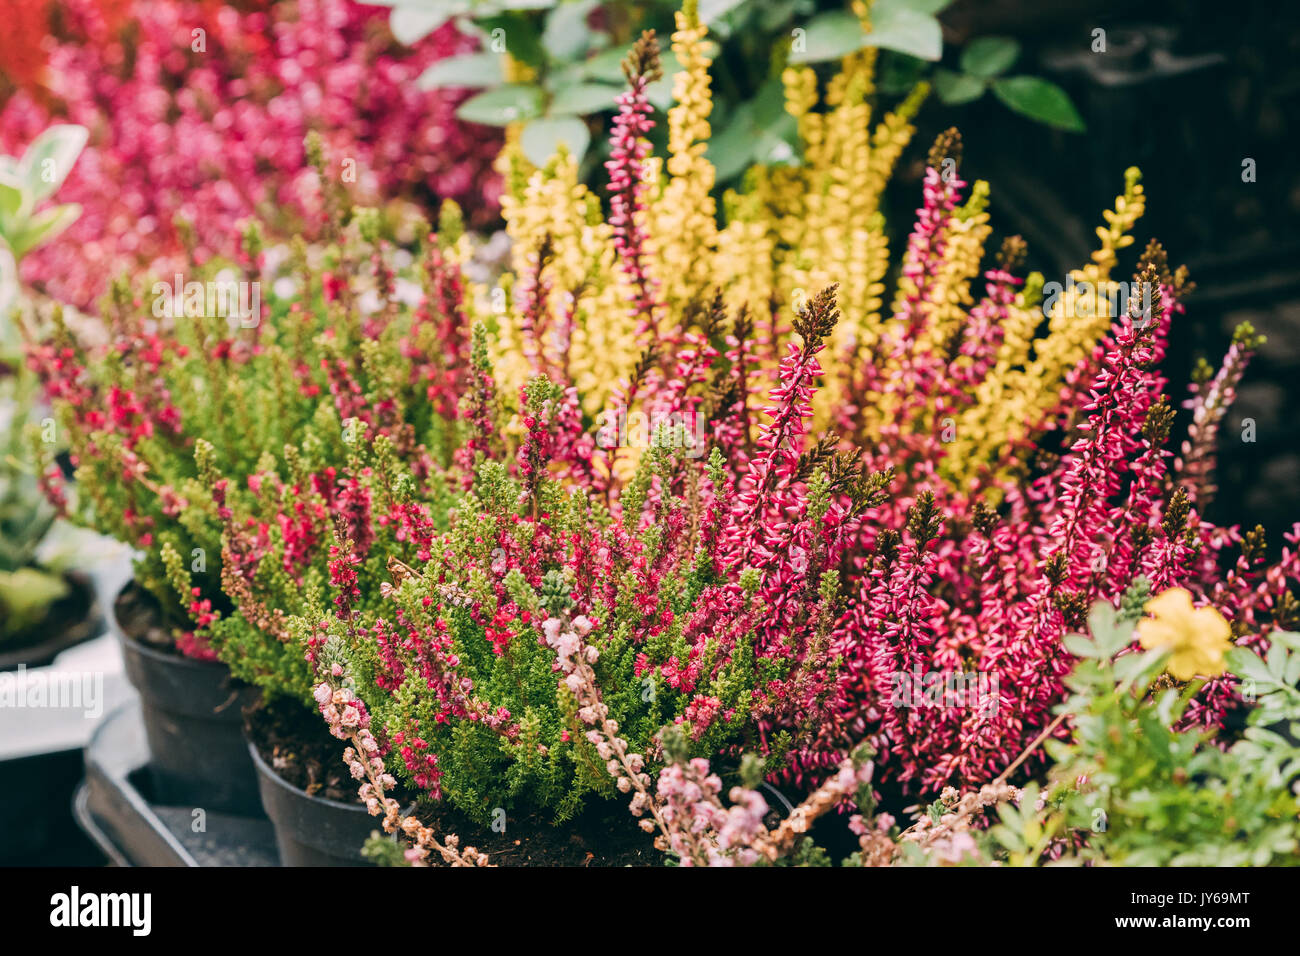 Bush Of Calluna Plant With Pink Flowers In Pot In Flower Store Market. Stock Photo